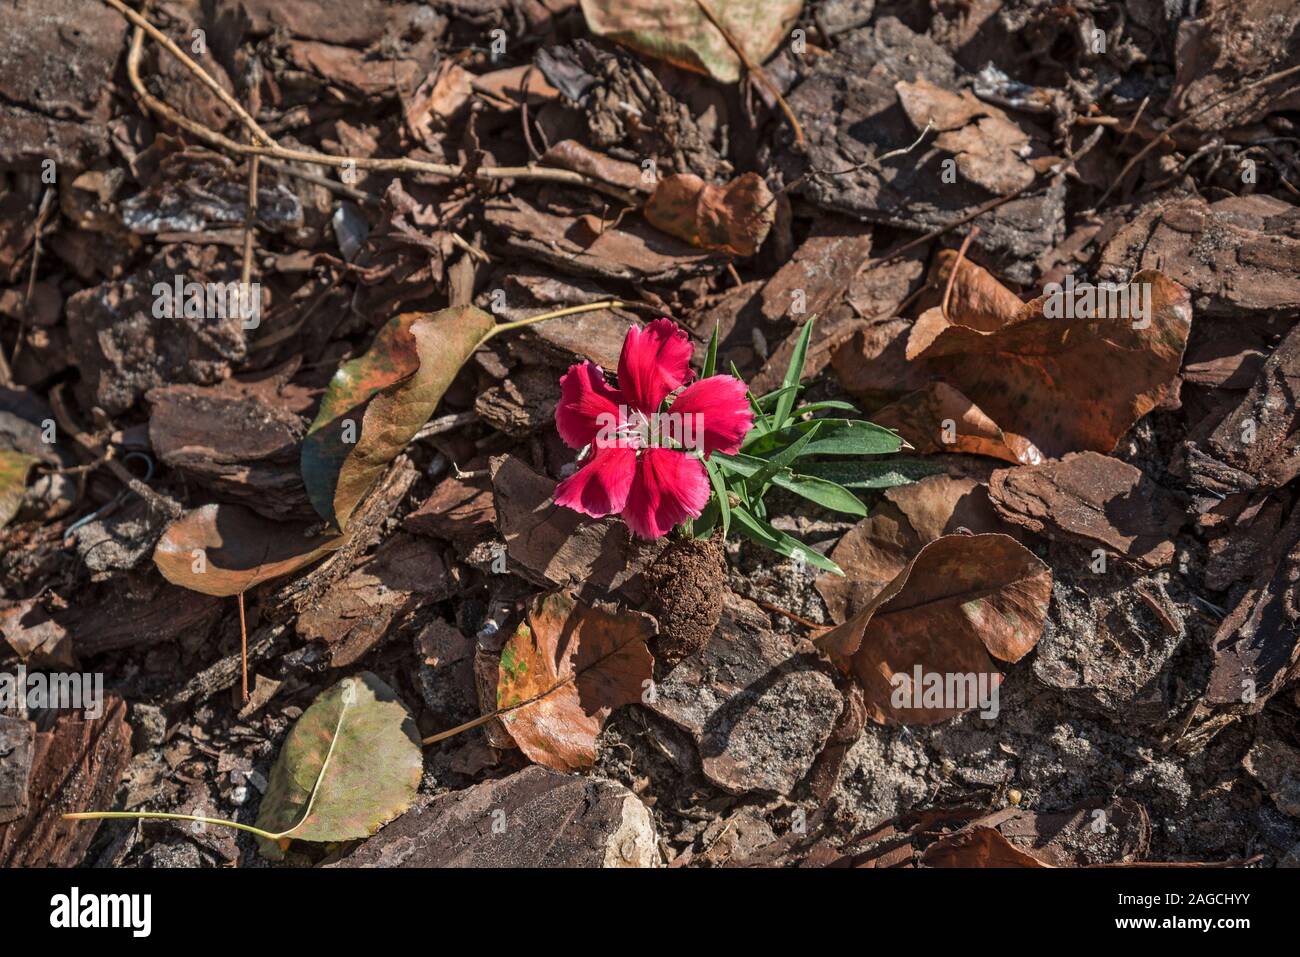 Beautiful single red flower growing among dead leaves and ground debris. Stock Photo